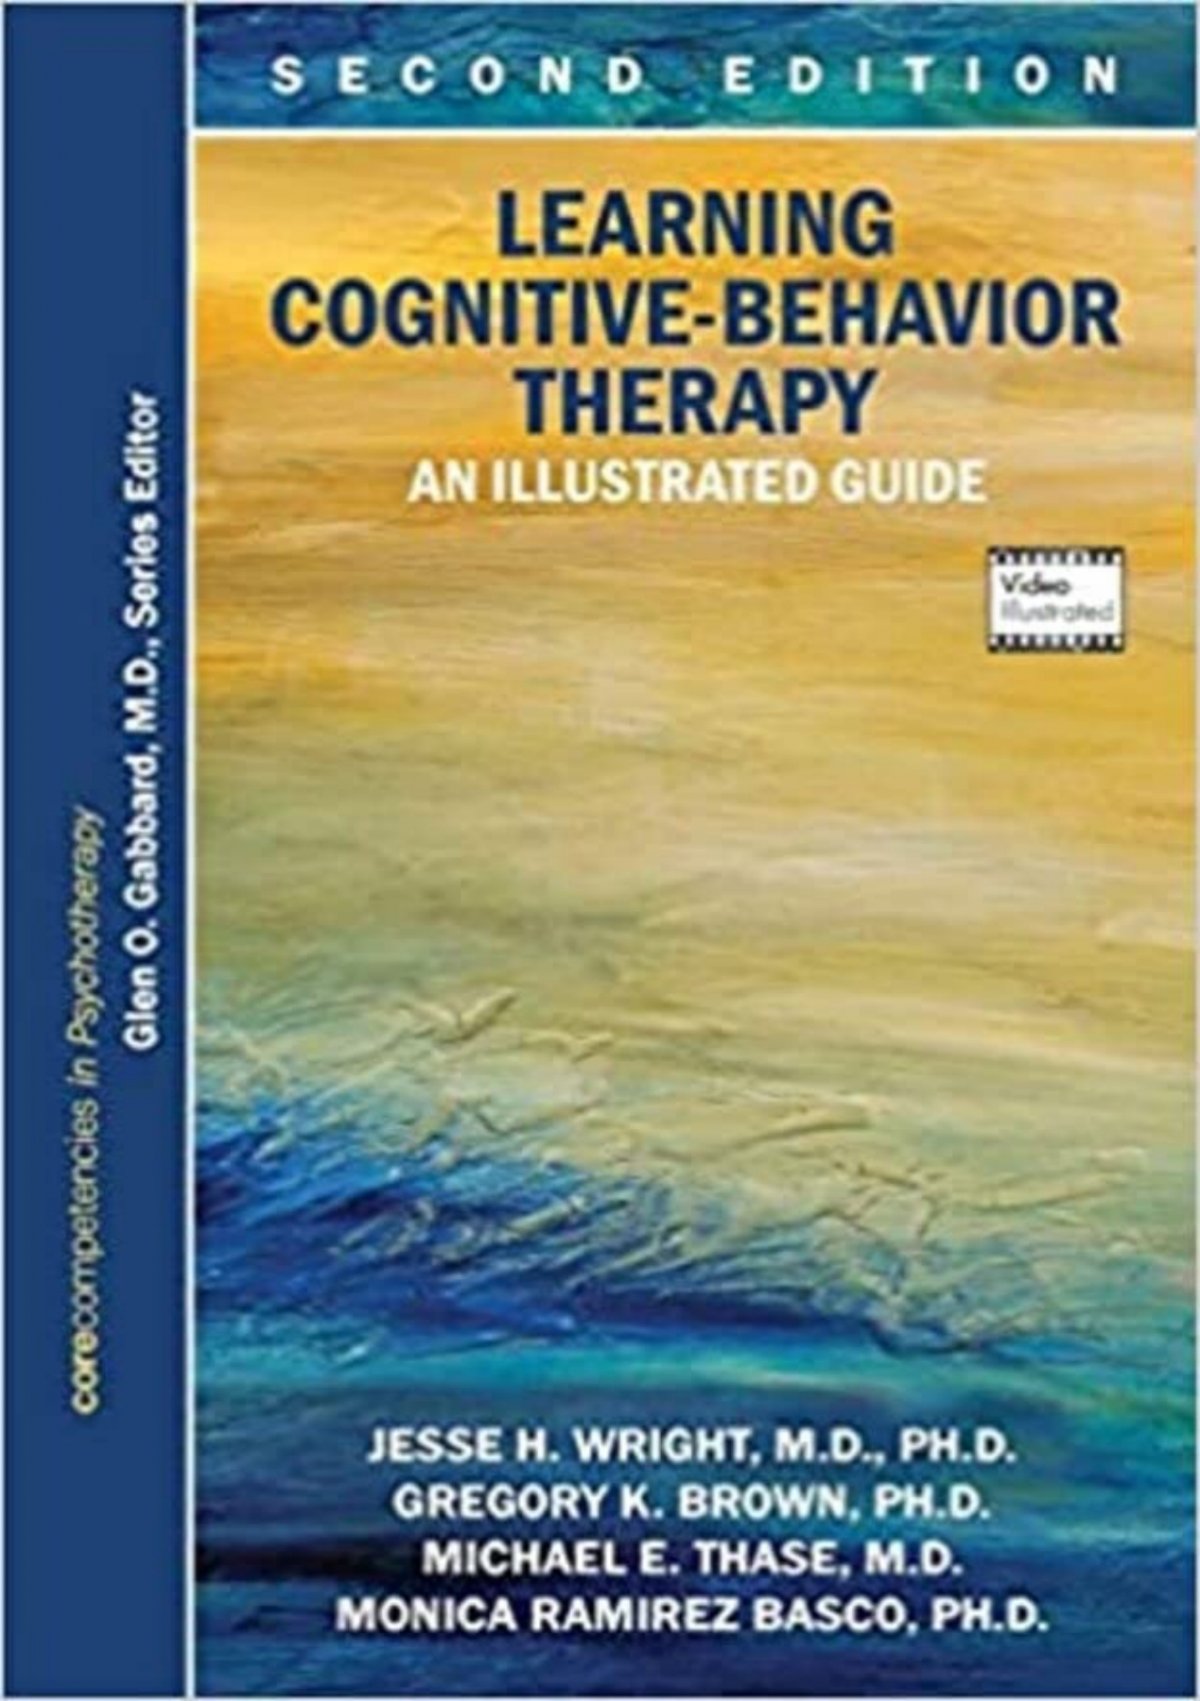 learning cognitive behavior therapy an illustrated guide pdf download